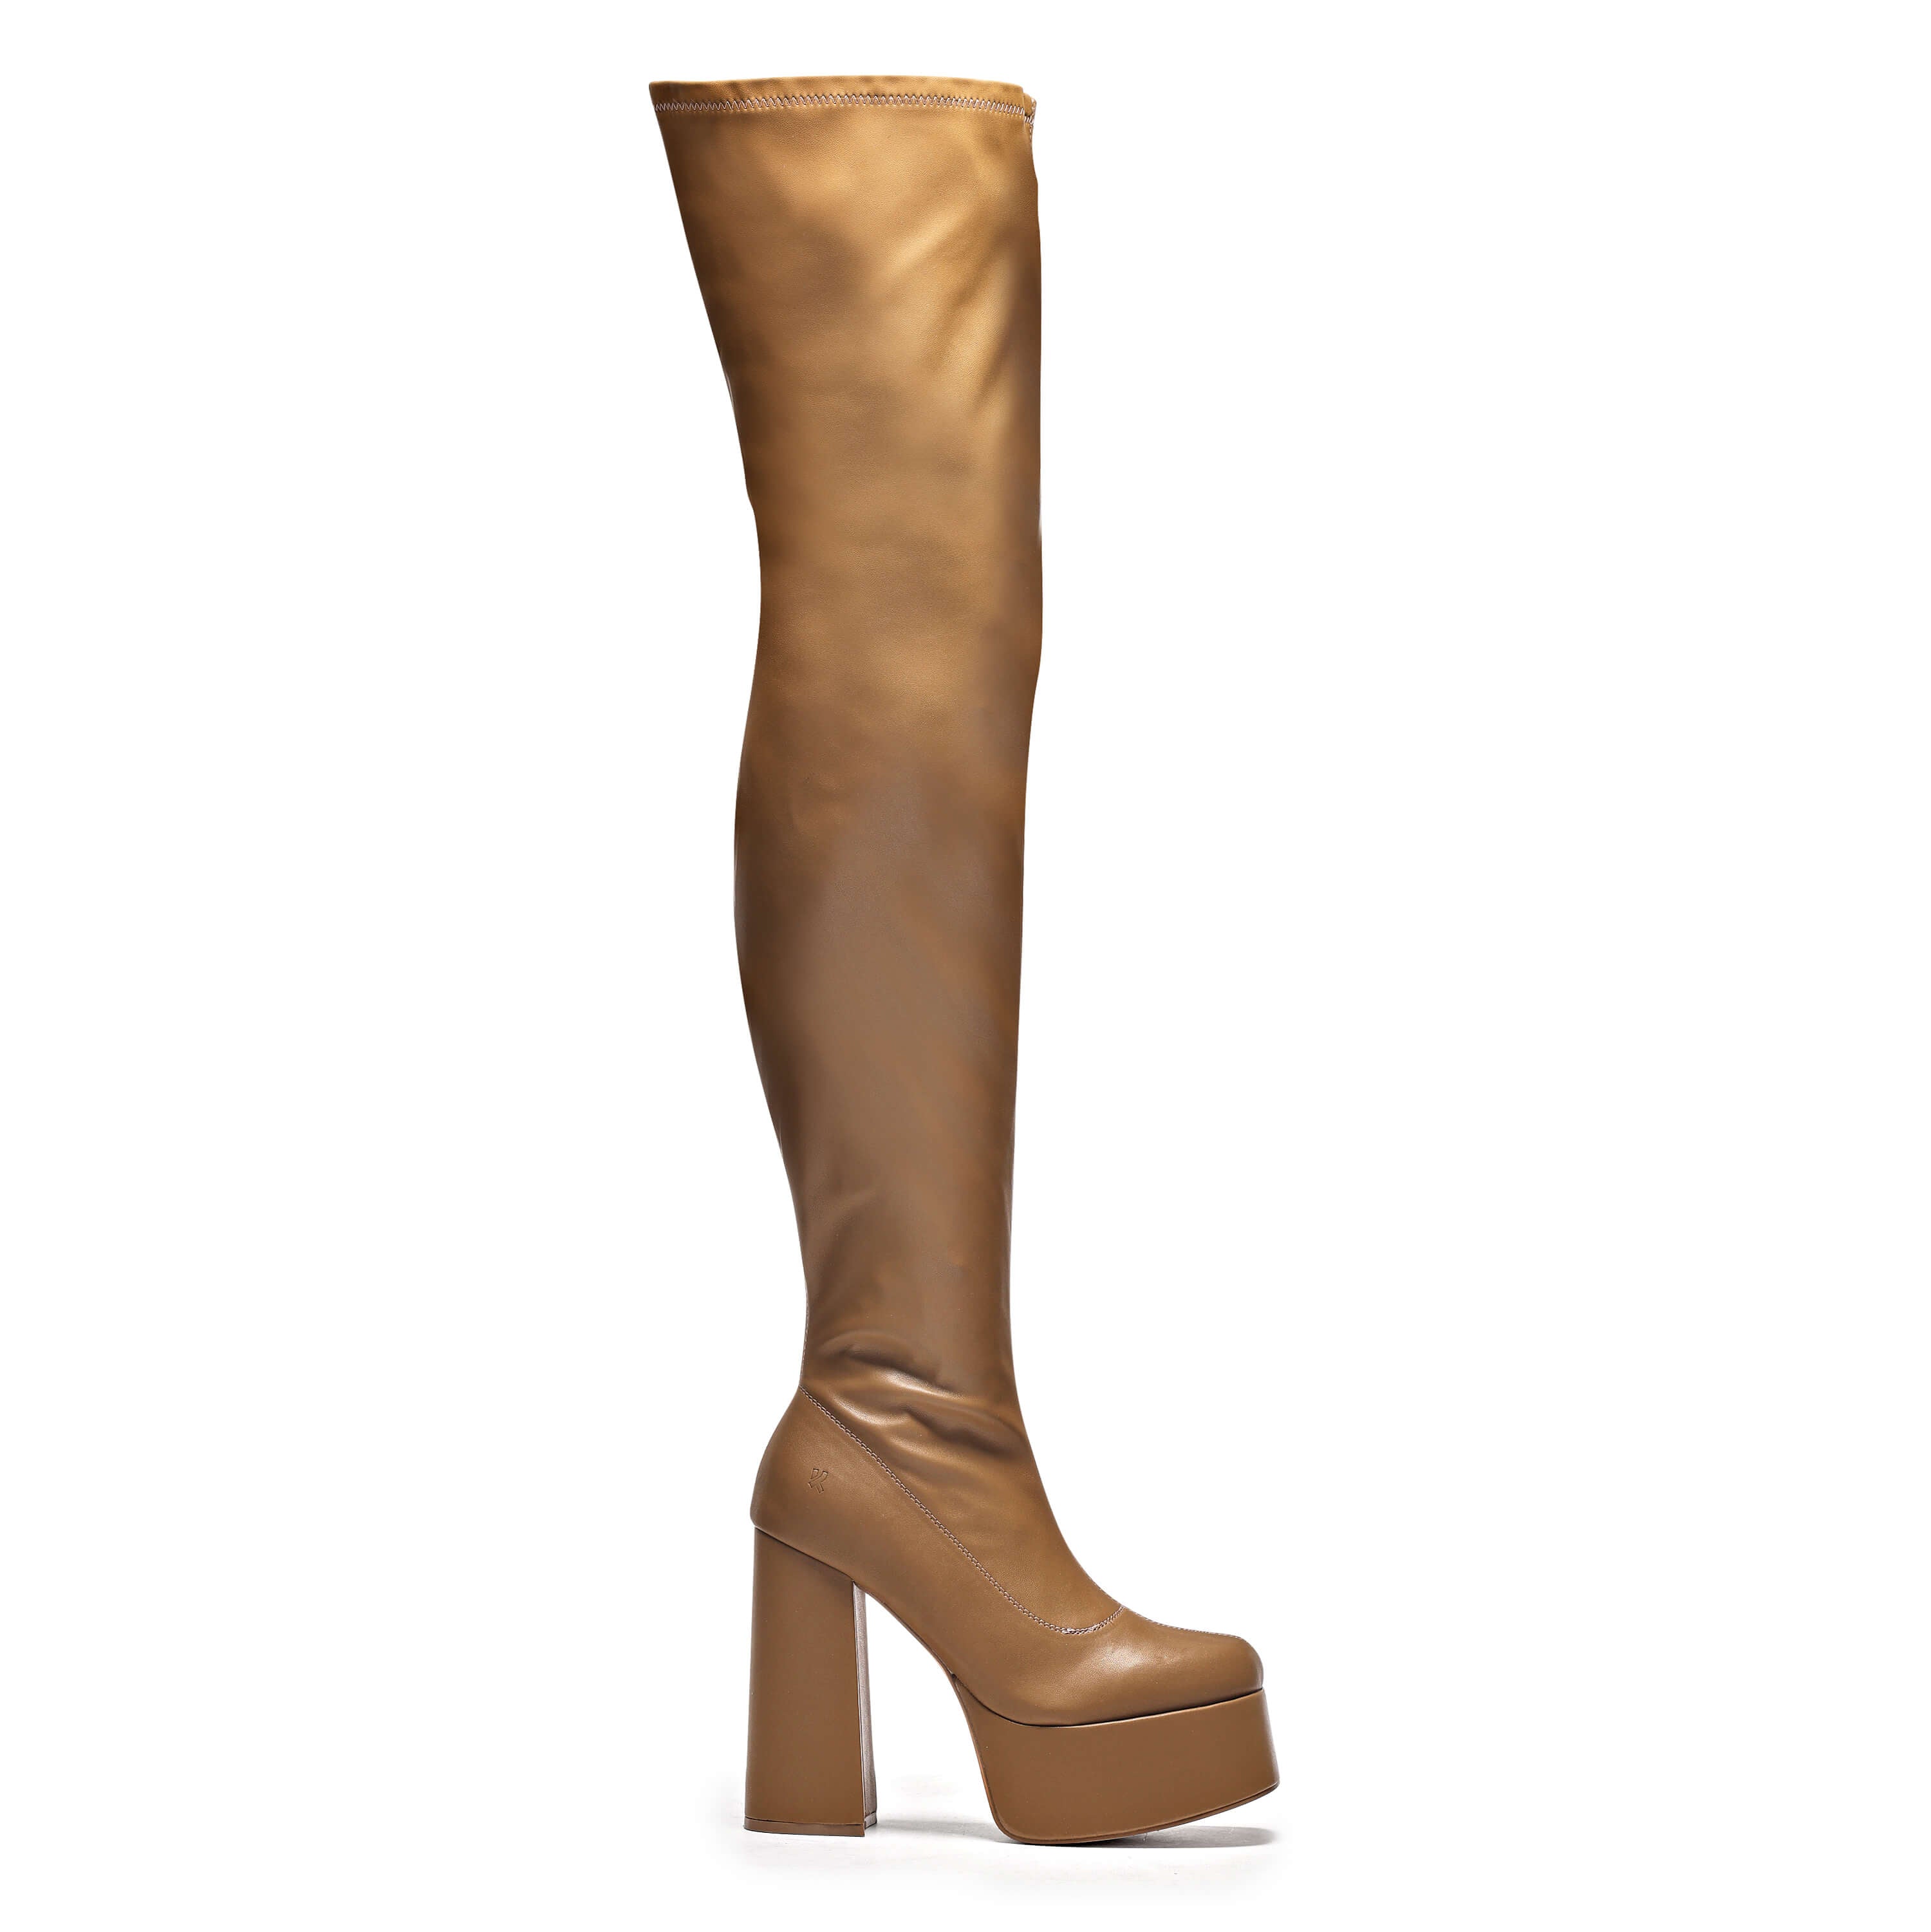 The Redemption Stretch Thigh High Boots - Khaki